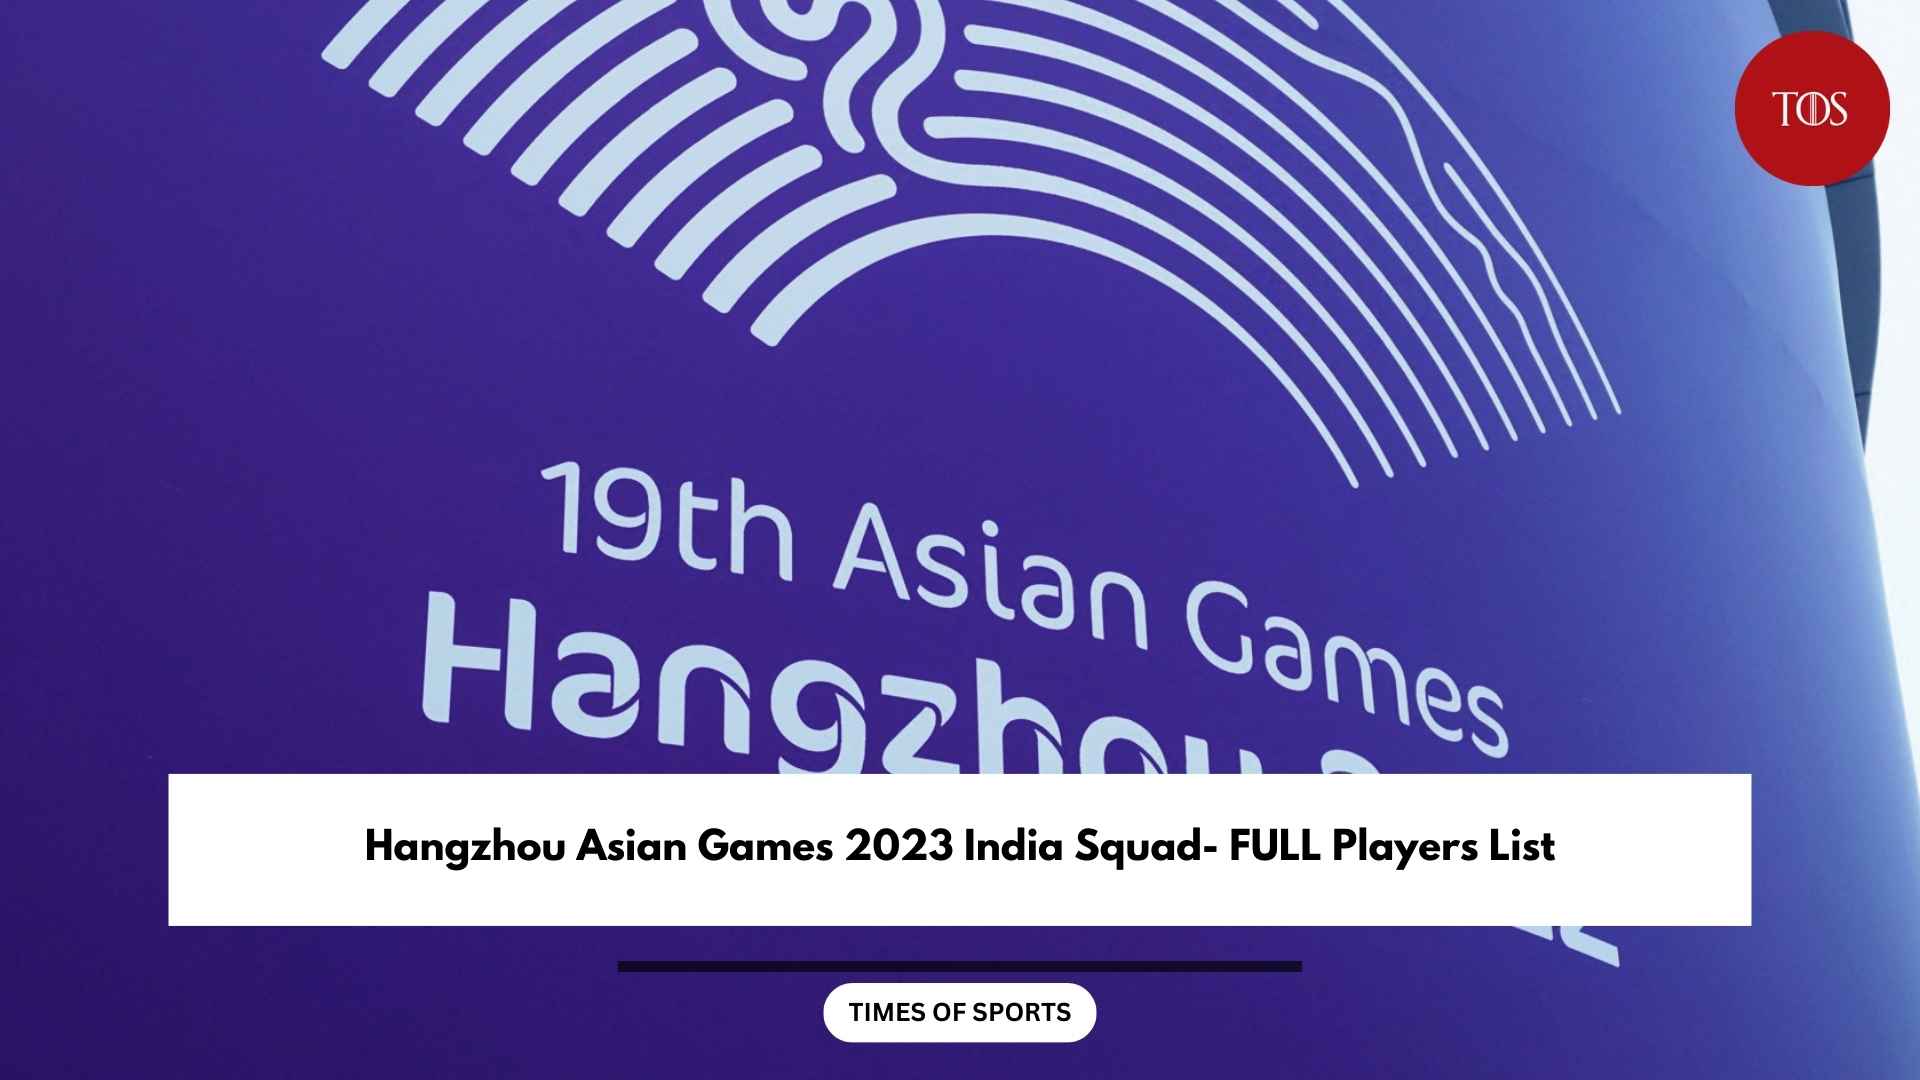 Hangzhou Asian Games 2023 India Squad FULL Players List